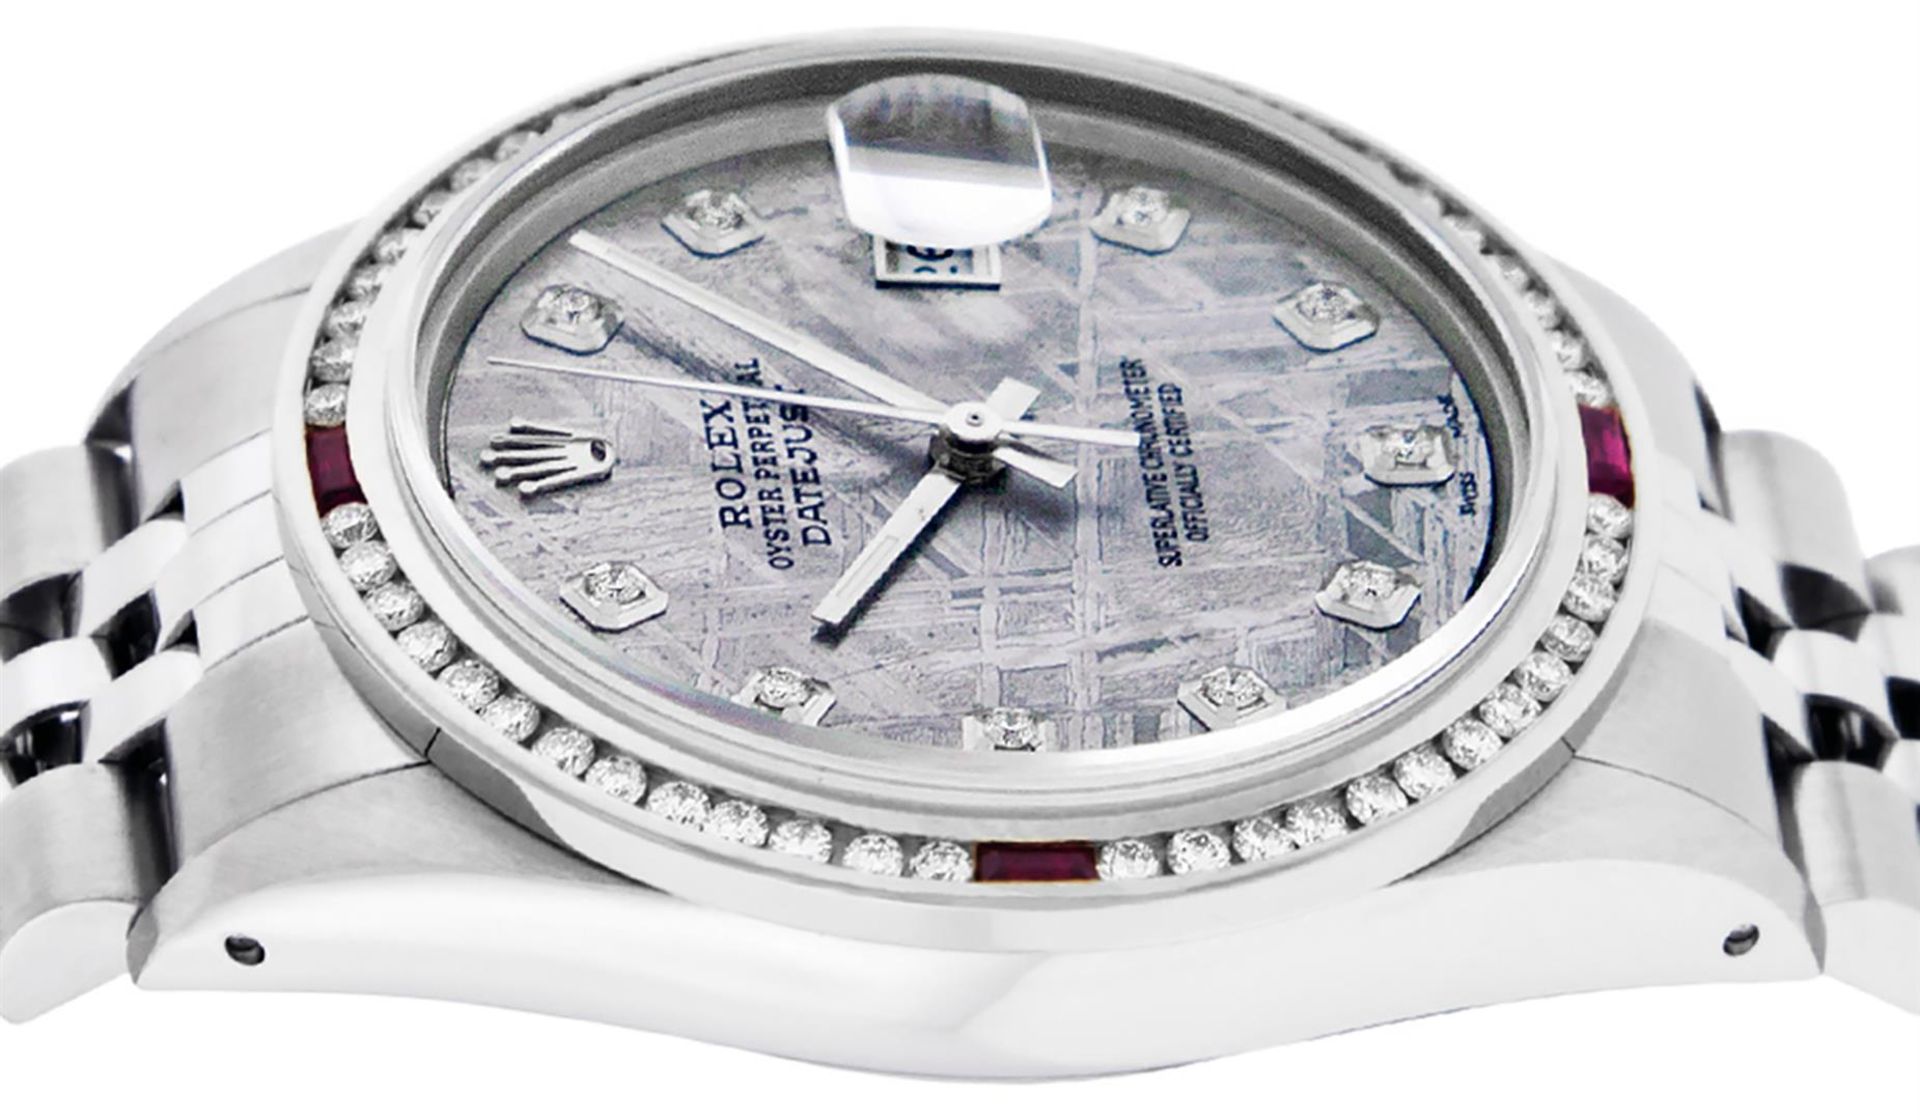 Rolex Mens SS Meteorite Diamond & Ruby Channel Set Oyster Perpetual Datejust Wri - Image 9 of 9